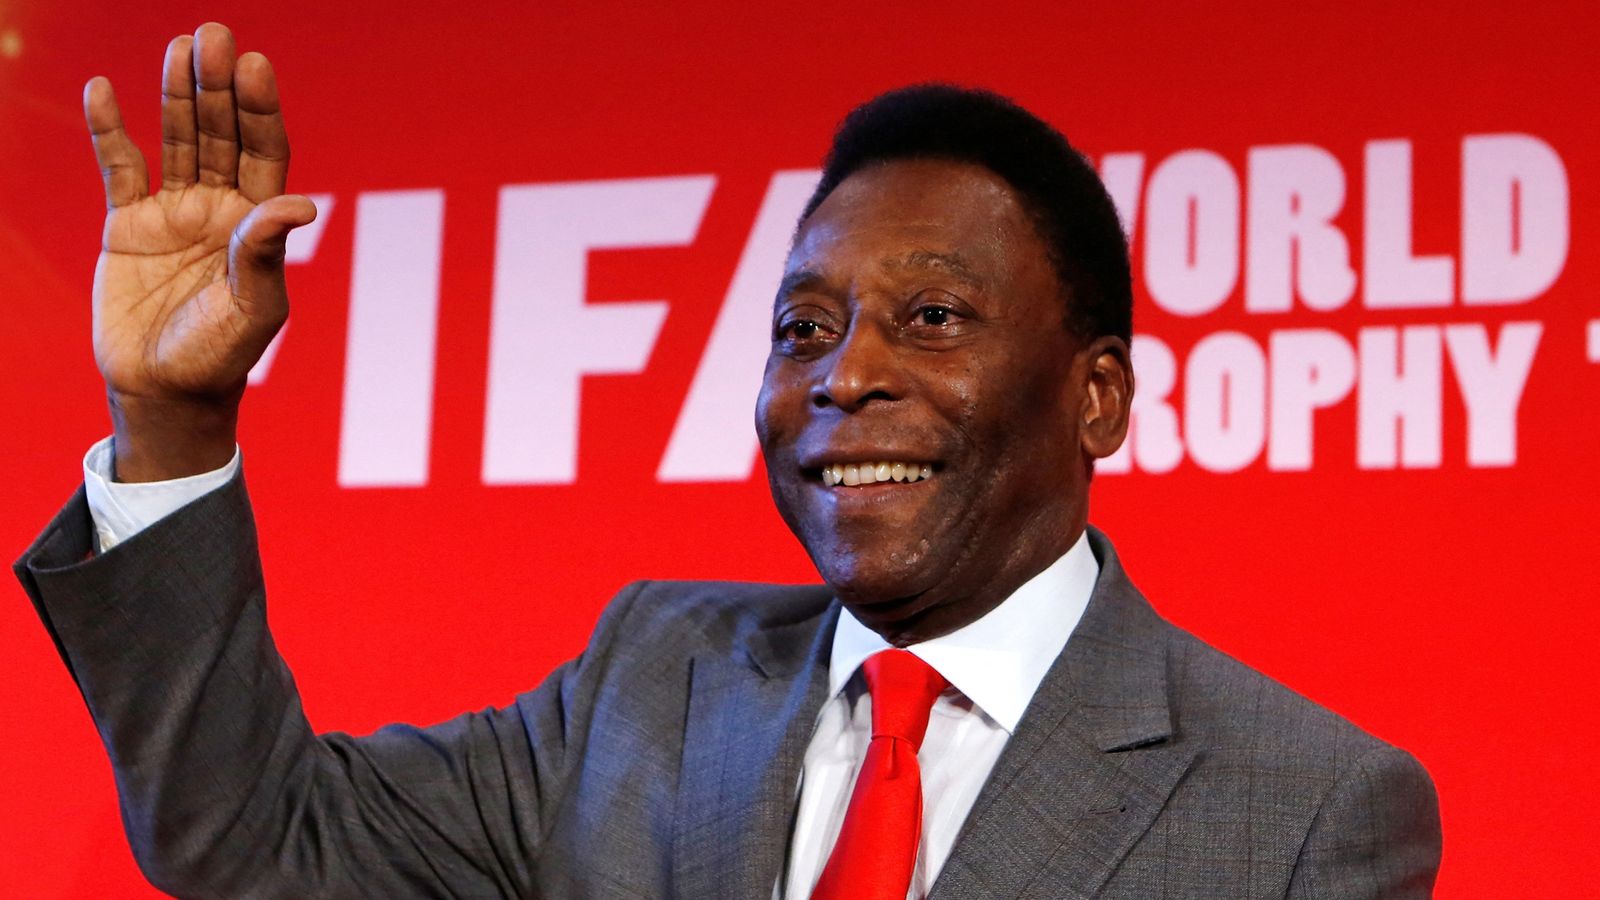 Pele says he feels 'strong' in first comment since report said he was receiving end of life care